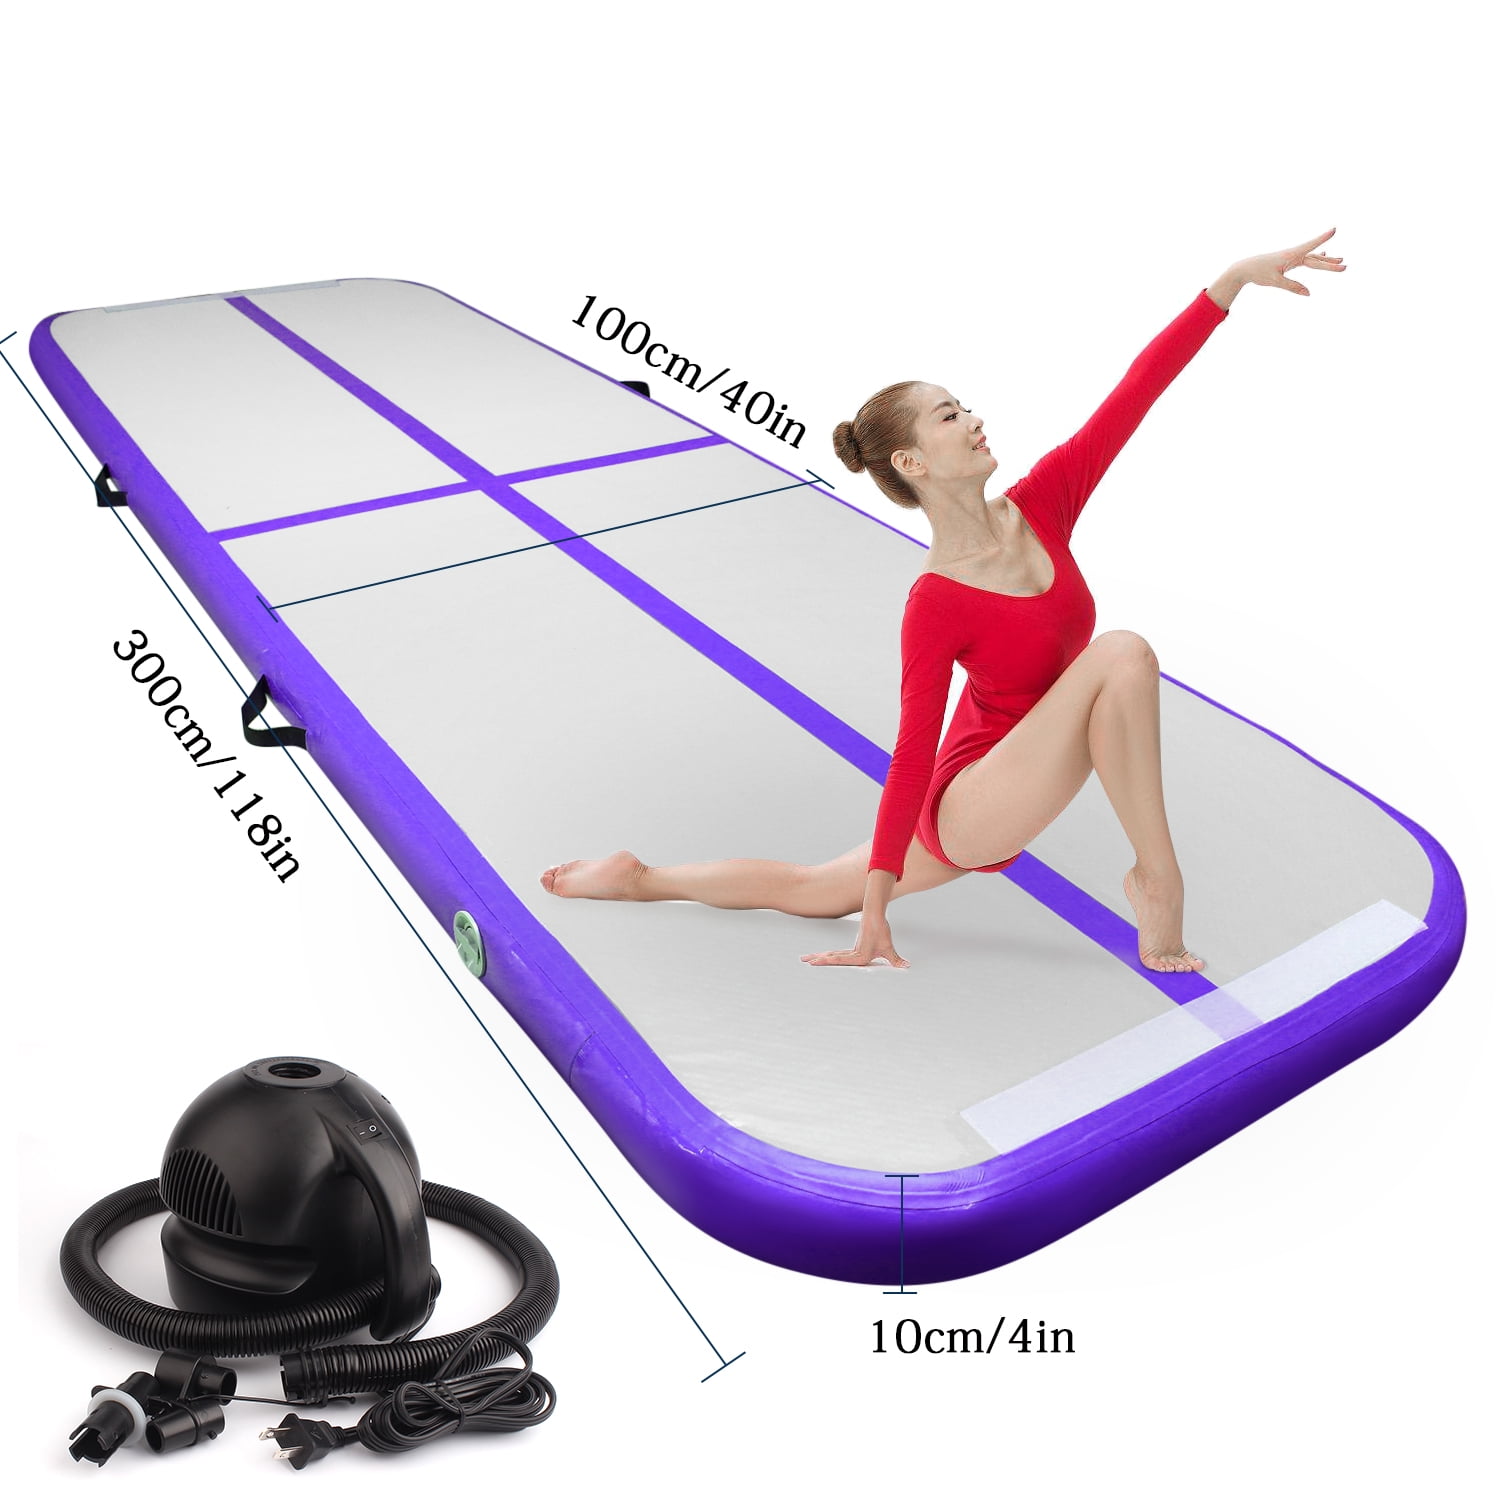 9.84ft/13.12ft/16.4ft/19.68ft air Track Tumbling mat Inflatable Gymnastics airtrack with Electric Air Pump for Practice Gymnastics,Cheerleading Tumbling,Parkour and Martial Arts 